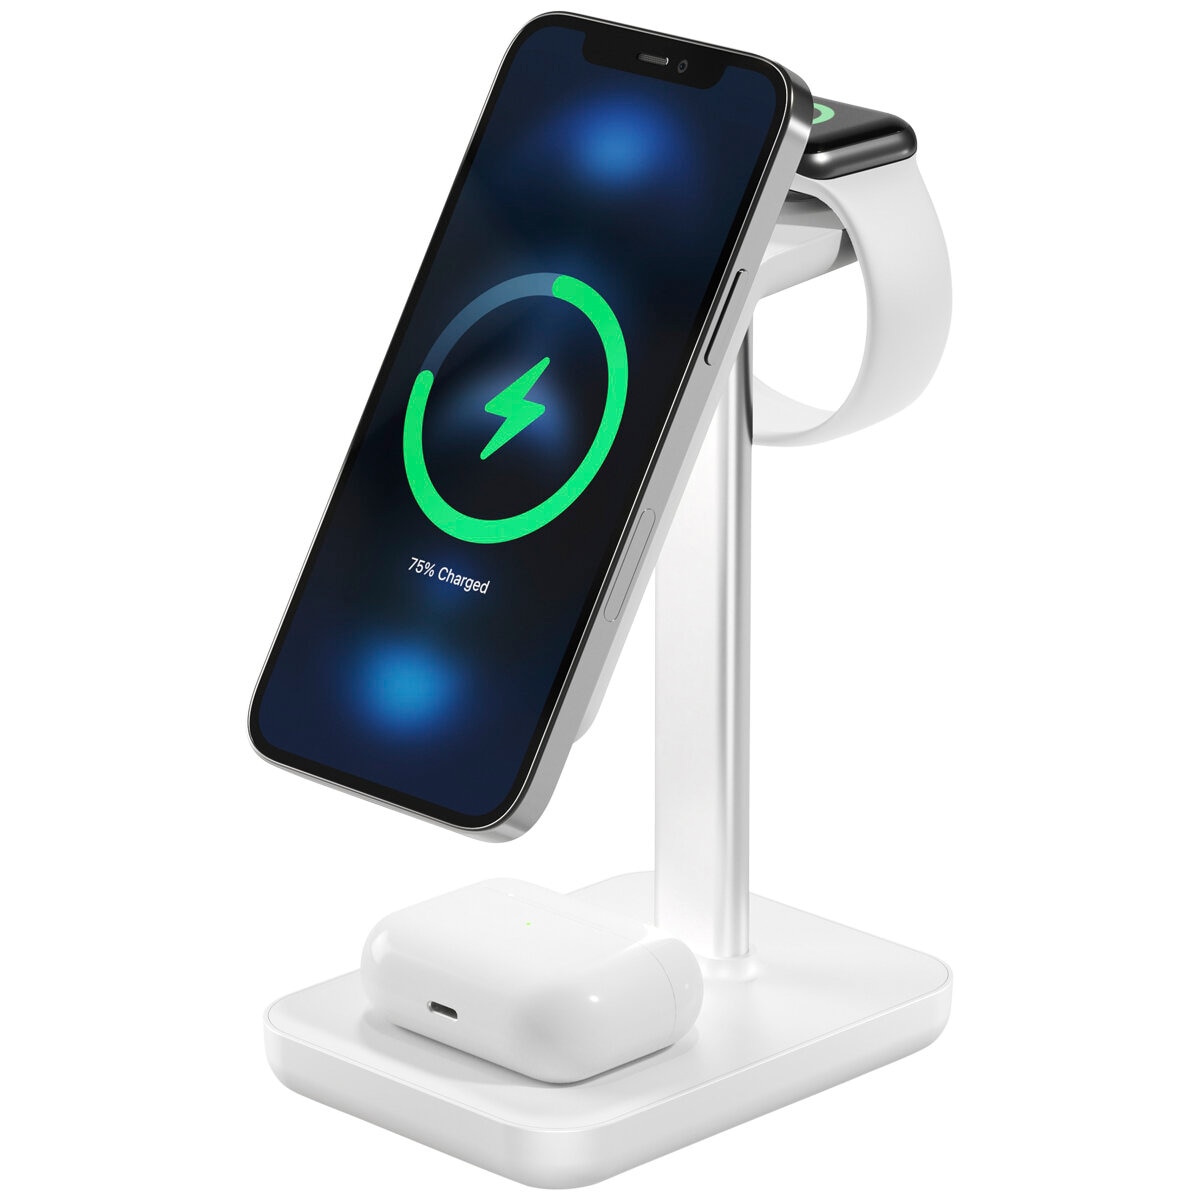 NFLWireless Charger and Desktop Organizer Renewed 